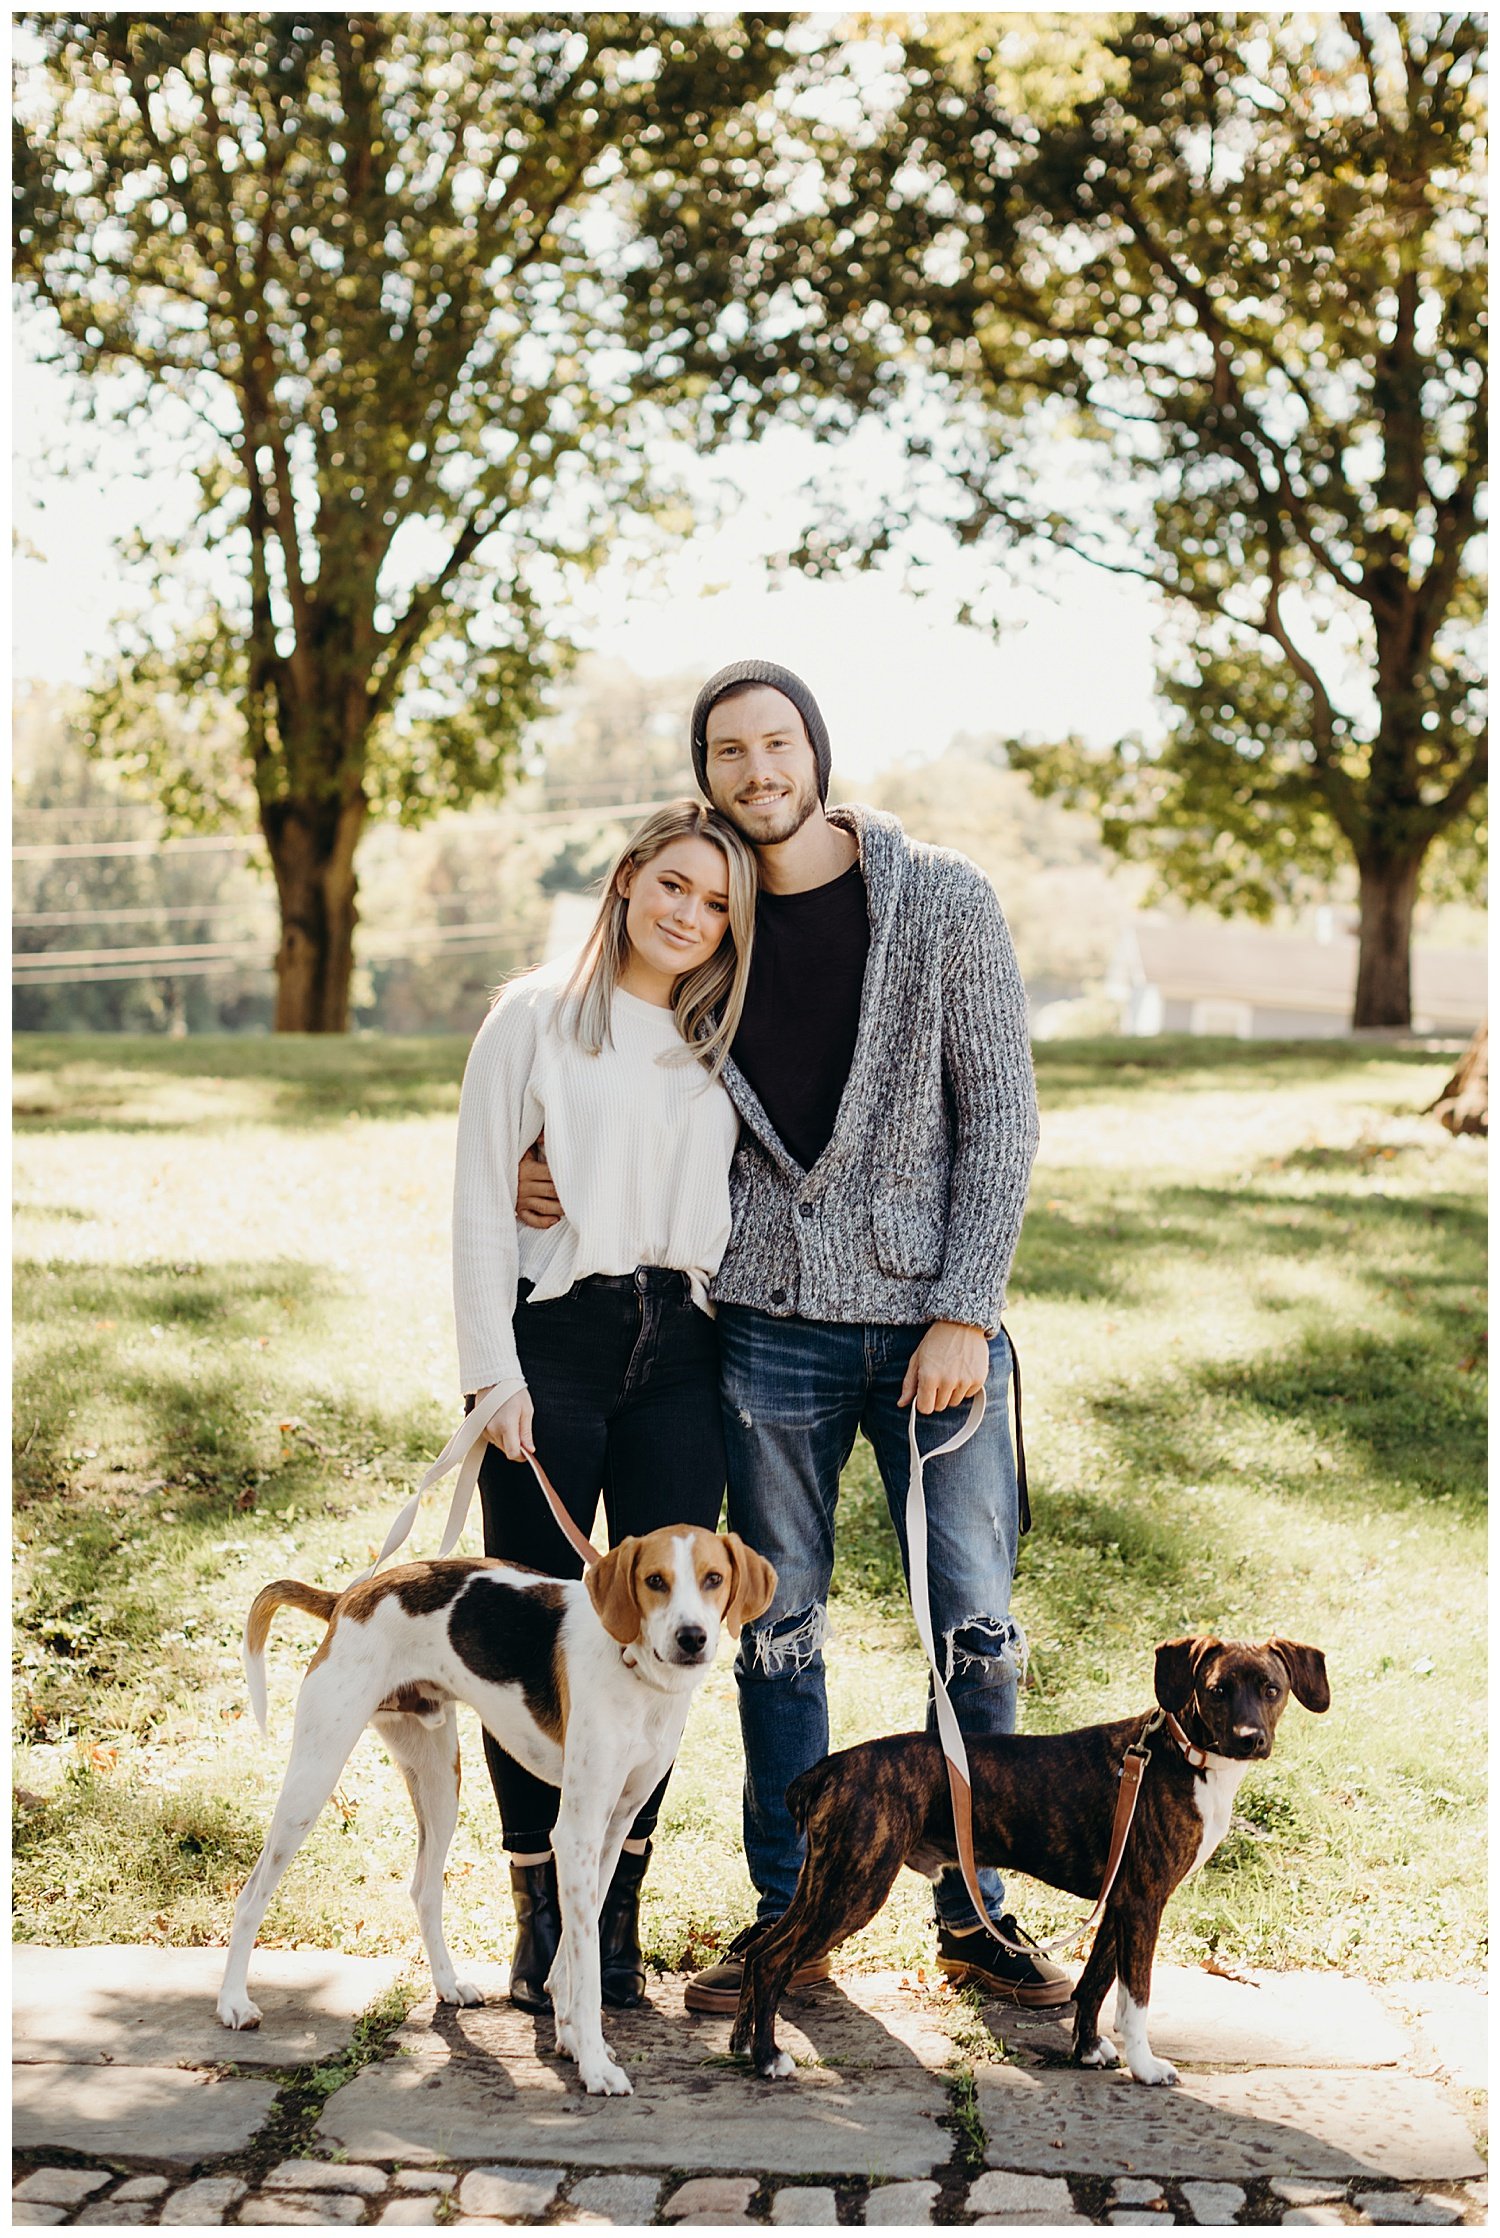  Downtown Lynchburg photo session along the Blackwater Creek and in front of old brick buildings!  Engagement Photos with Dogs. Candid Photography. Virginia Photographer. 